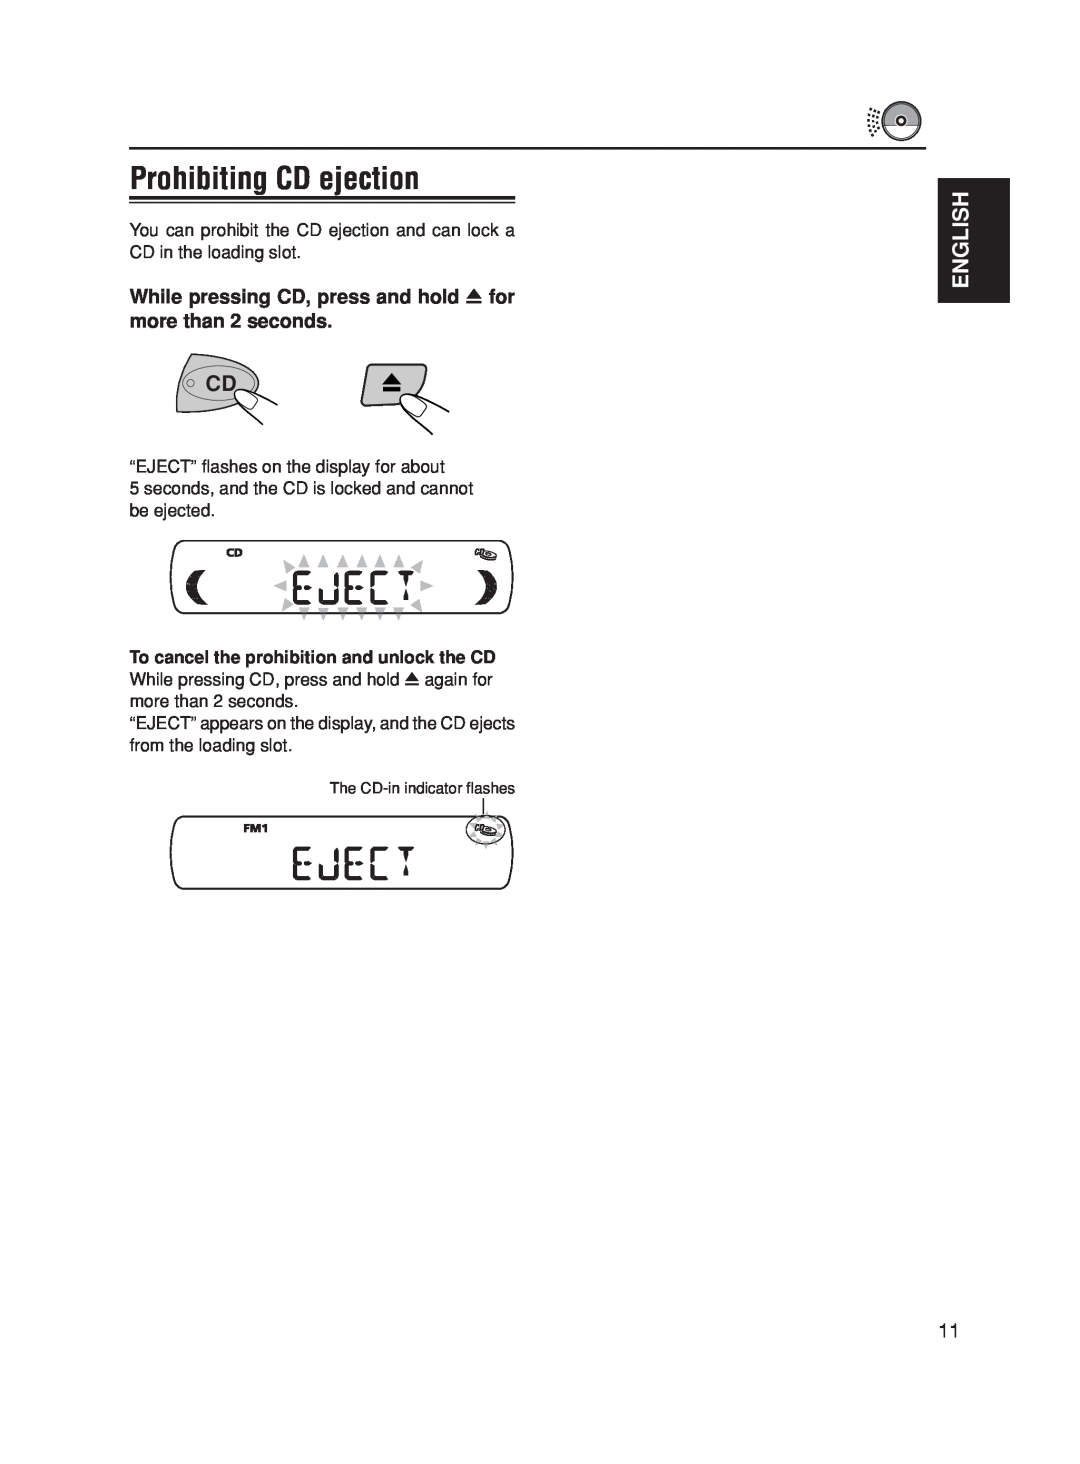 JVC KD-S5050, KD-S10 manual Prohibiting CD ejection, English 